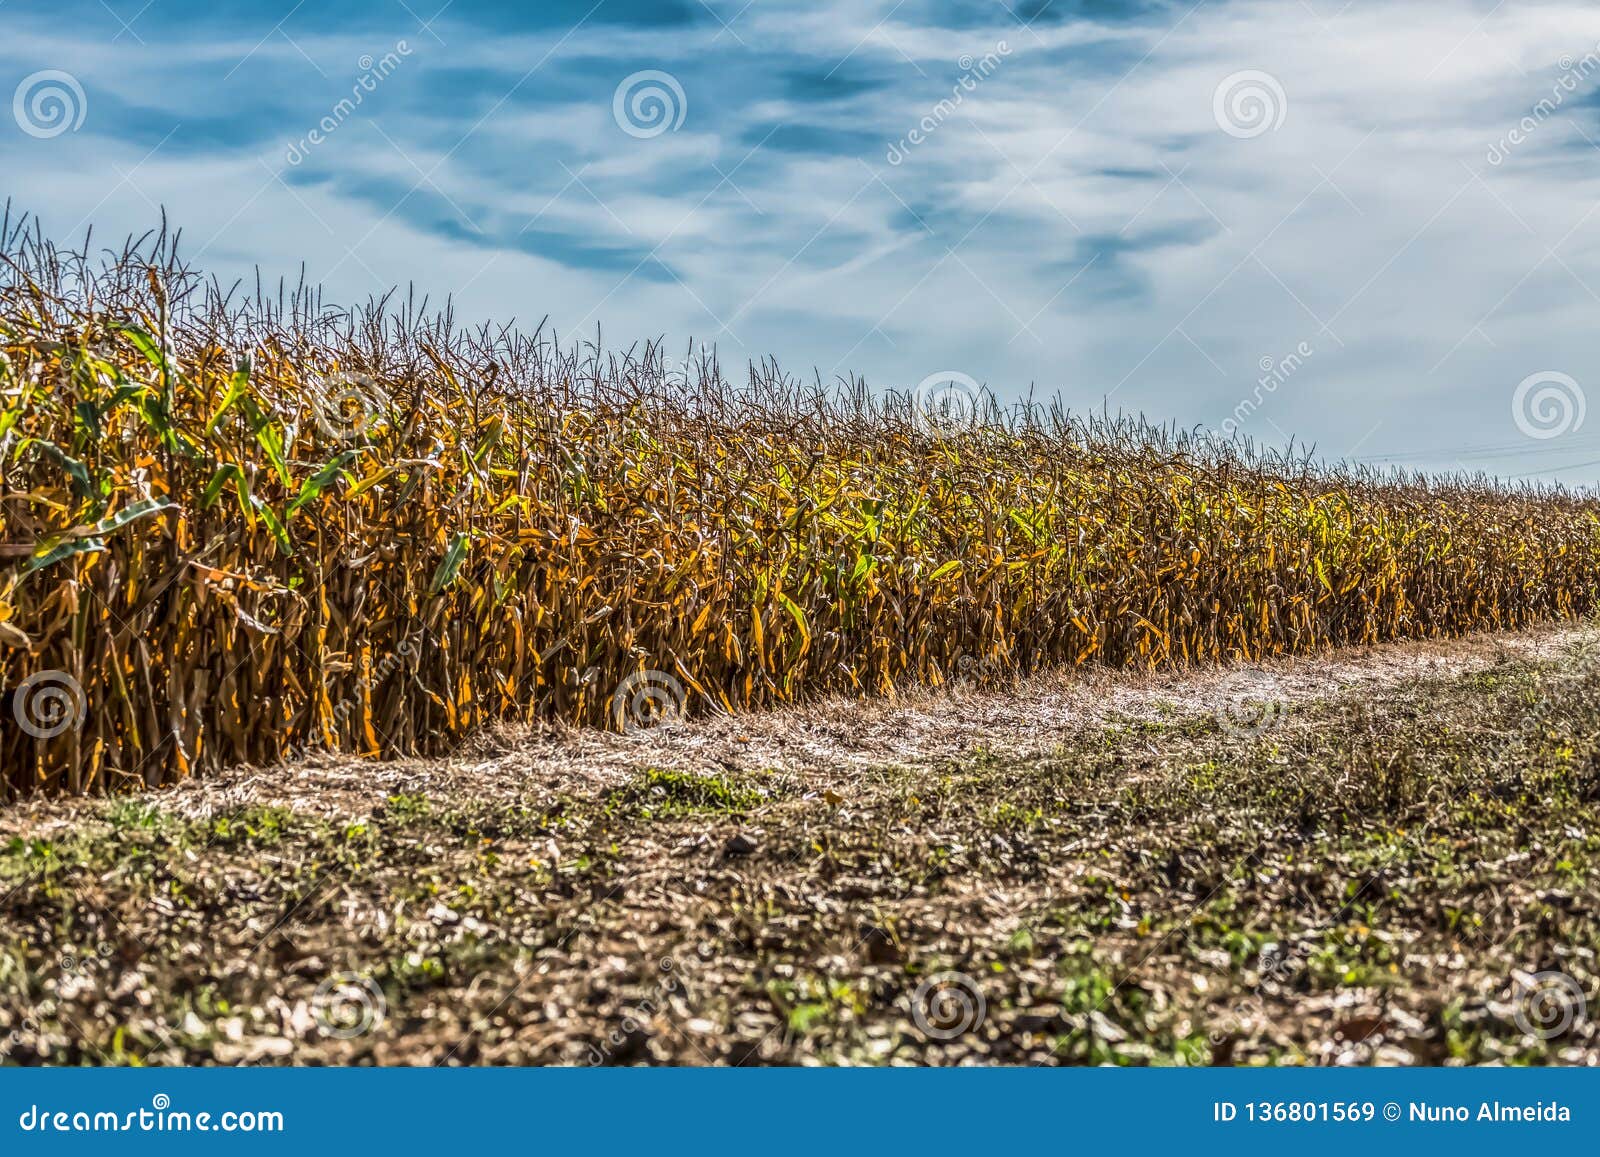 view of cornfield farmland, sky with clouds as background